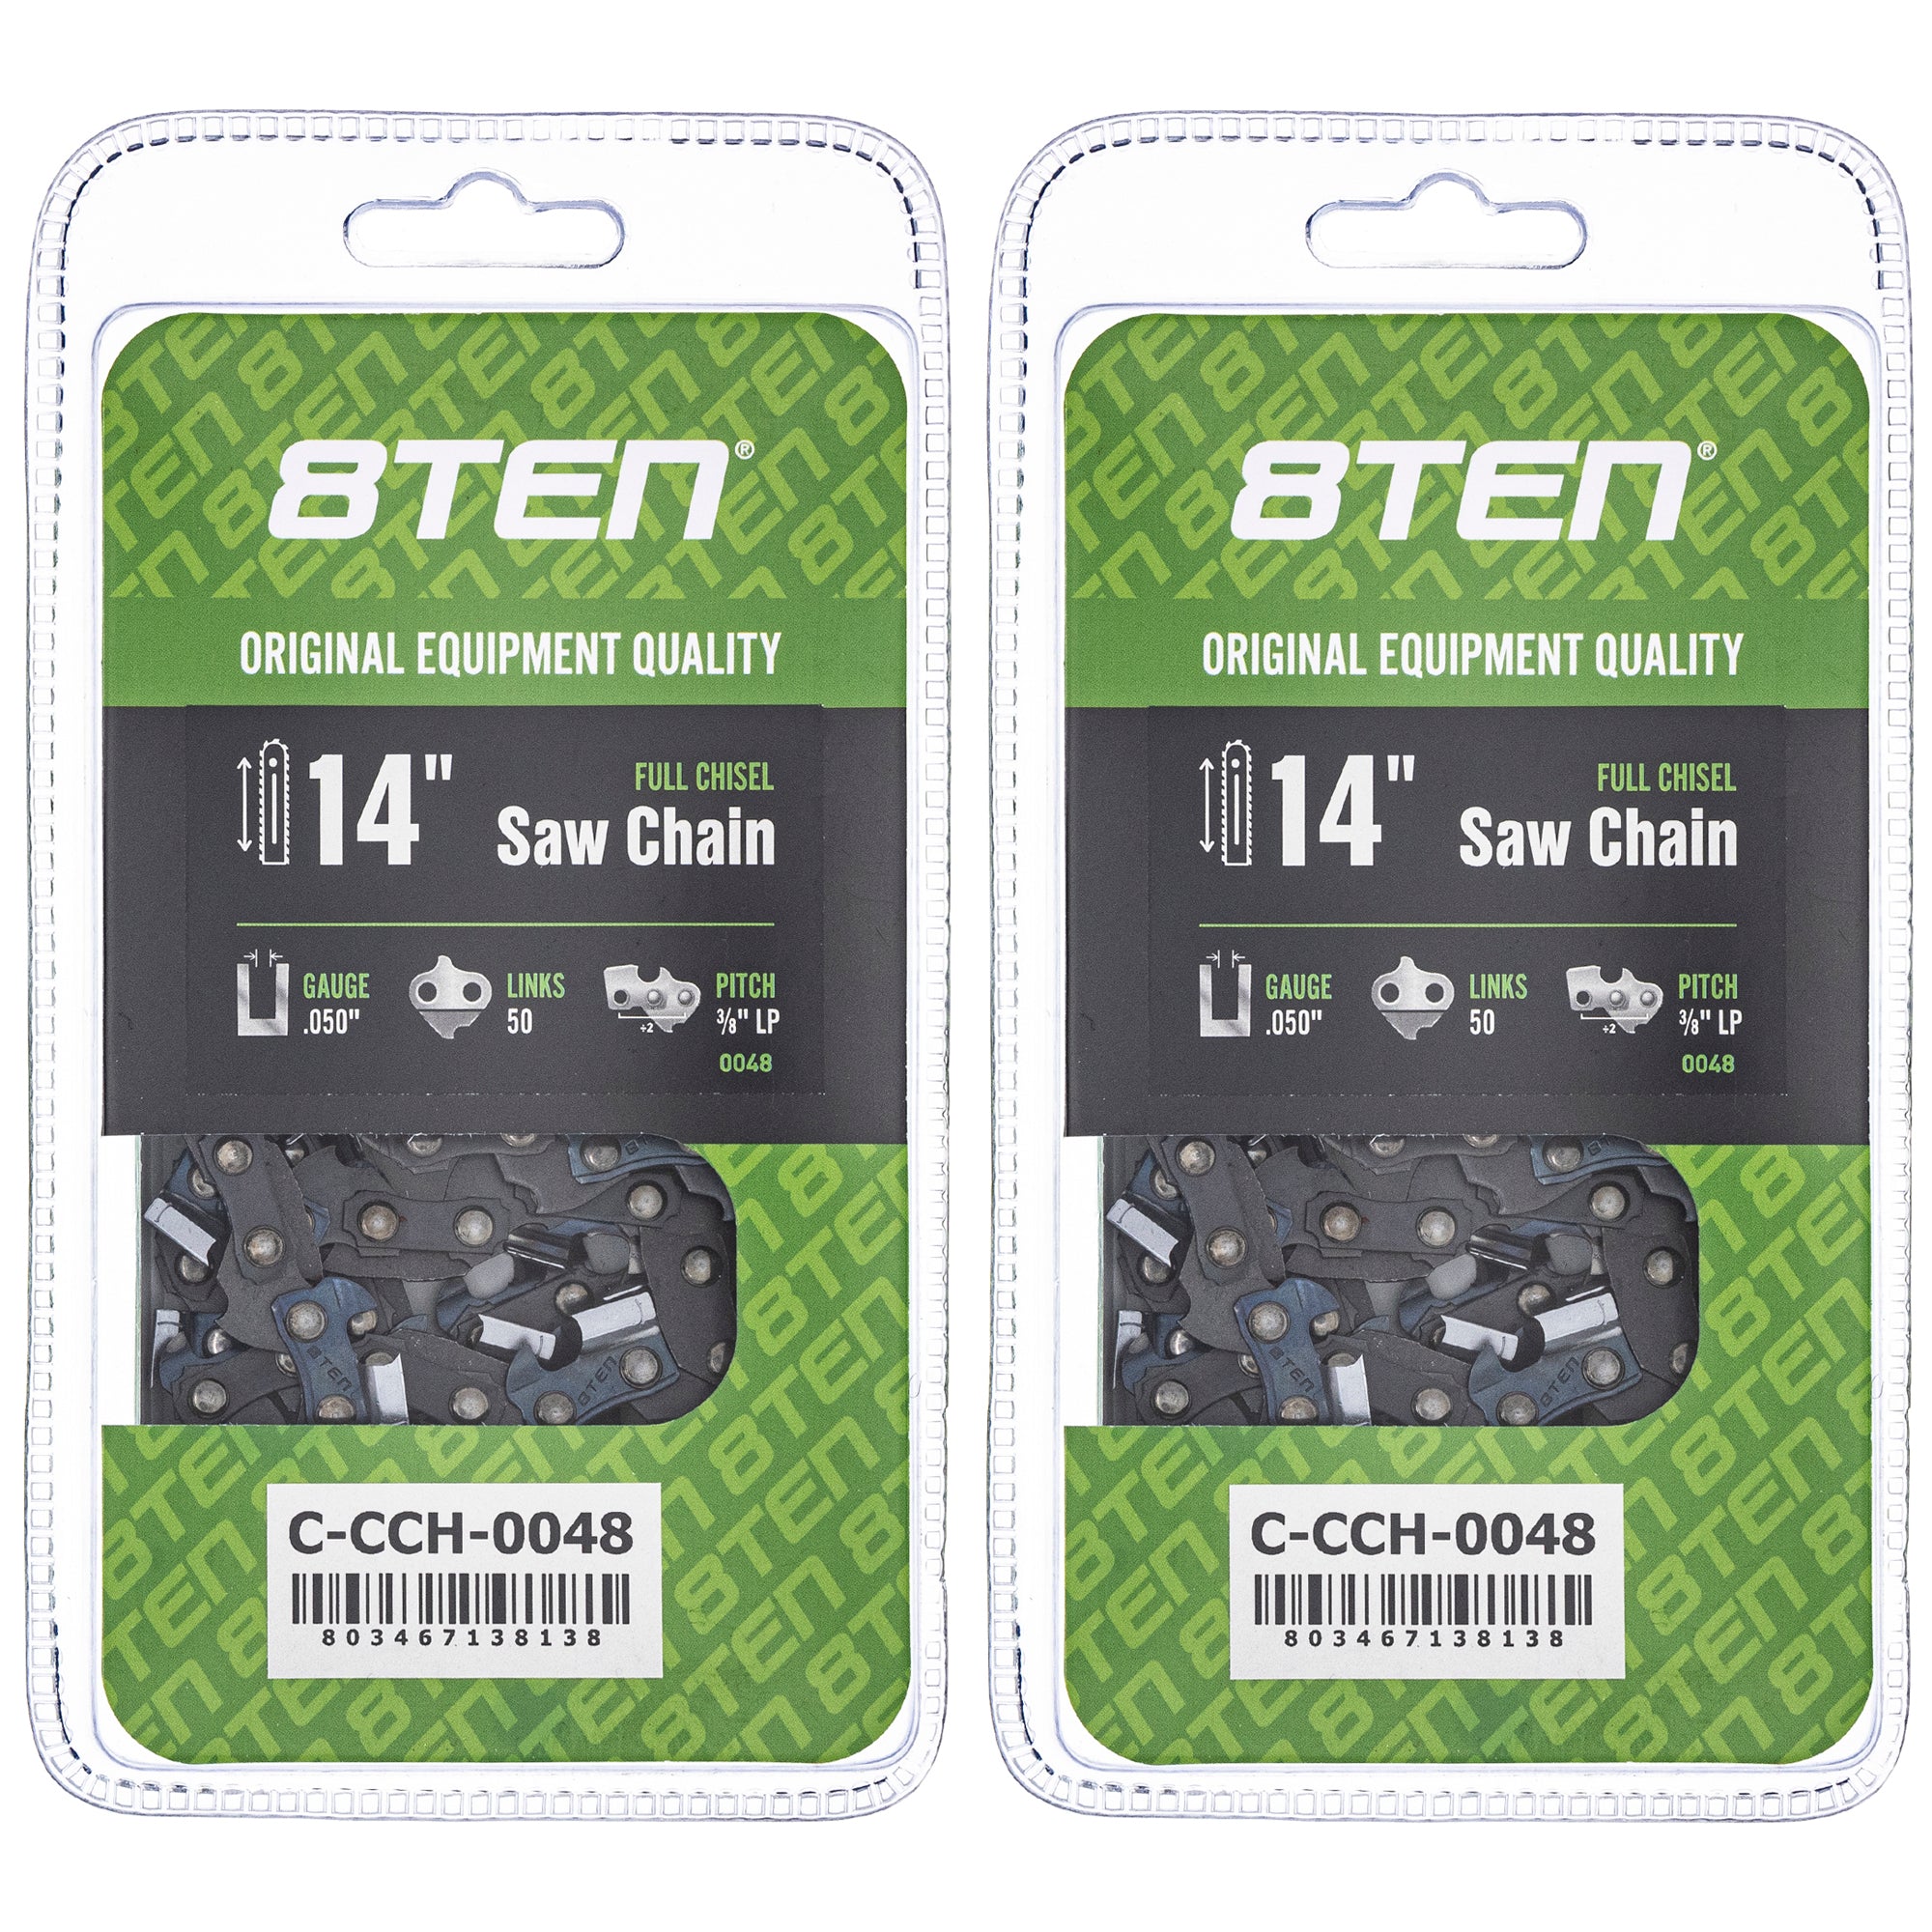 Chainsaw Chain 14 Inch .050 3/8 LP 50DL 2-Pack for zOTHER Oregon MSE MS HT E 8TEN 810-CCC2260H